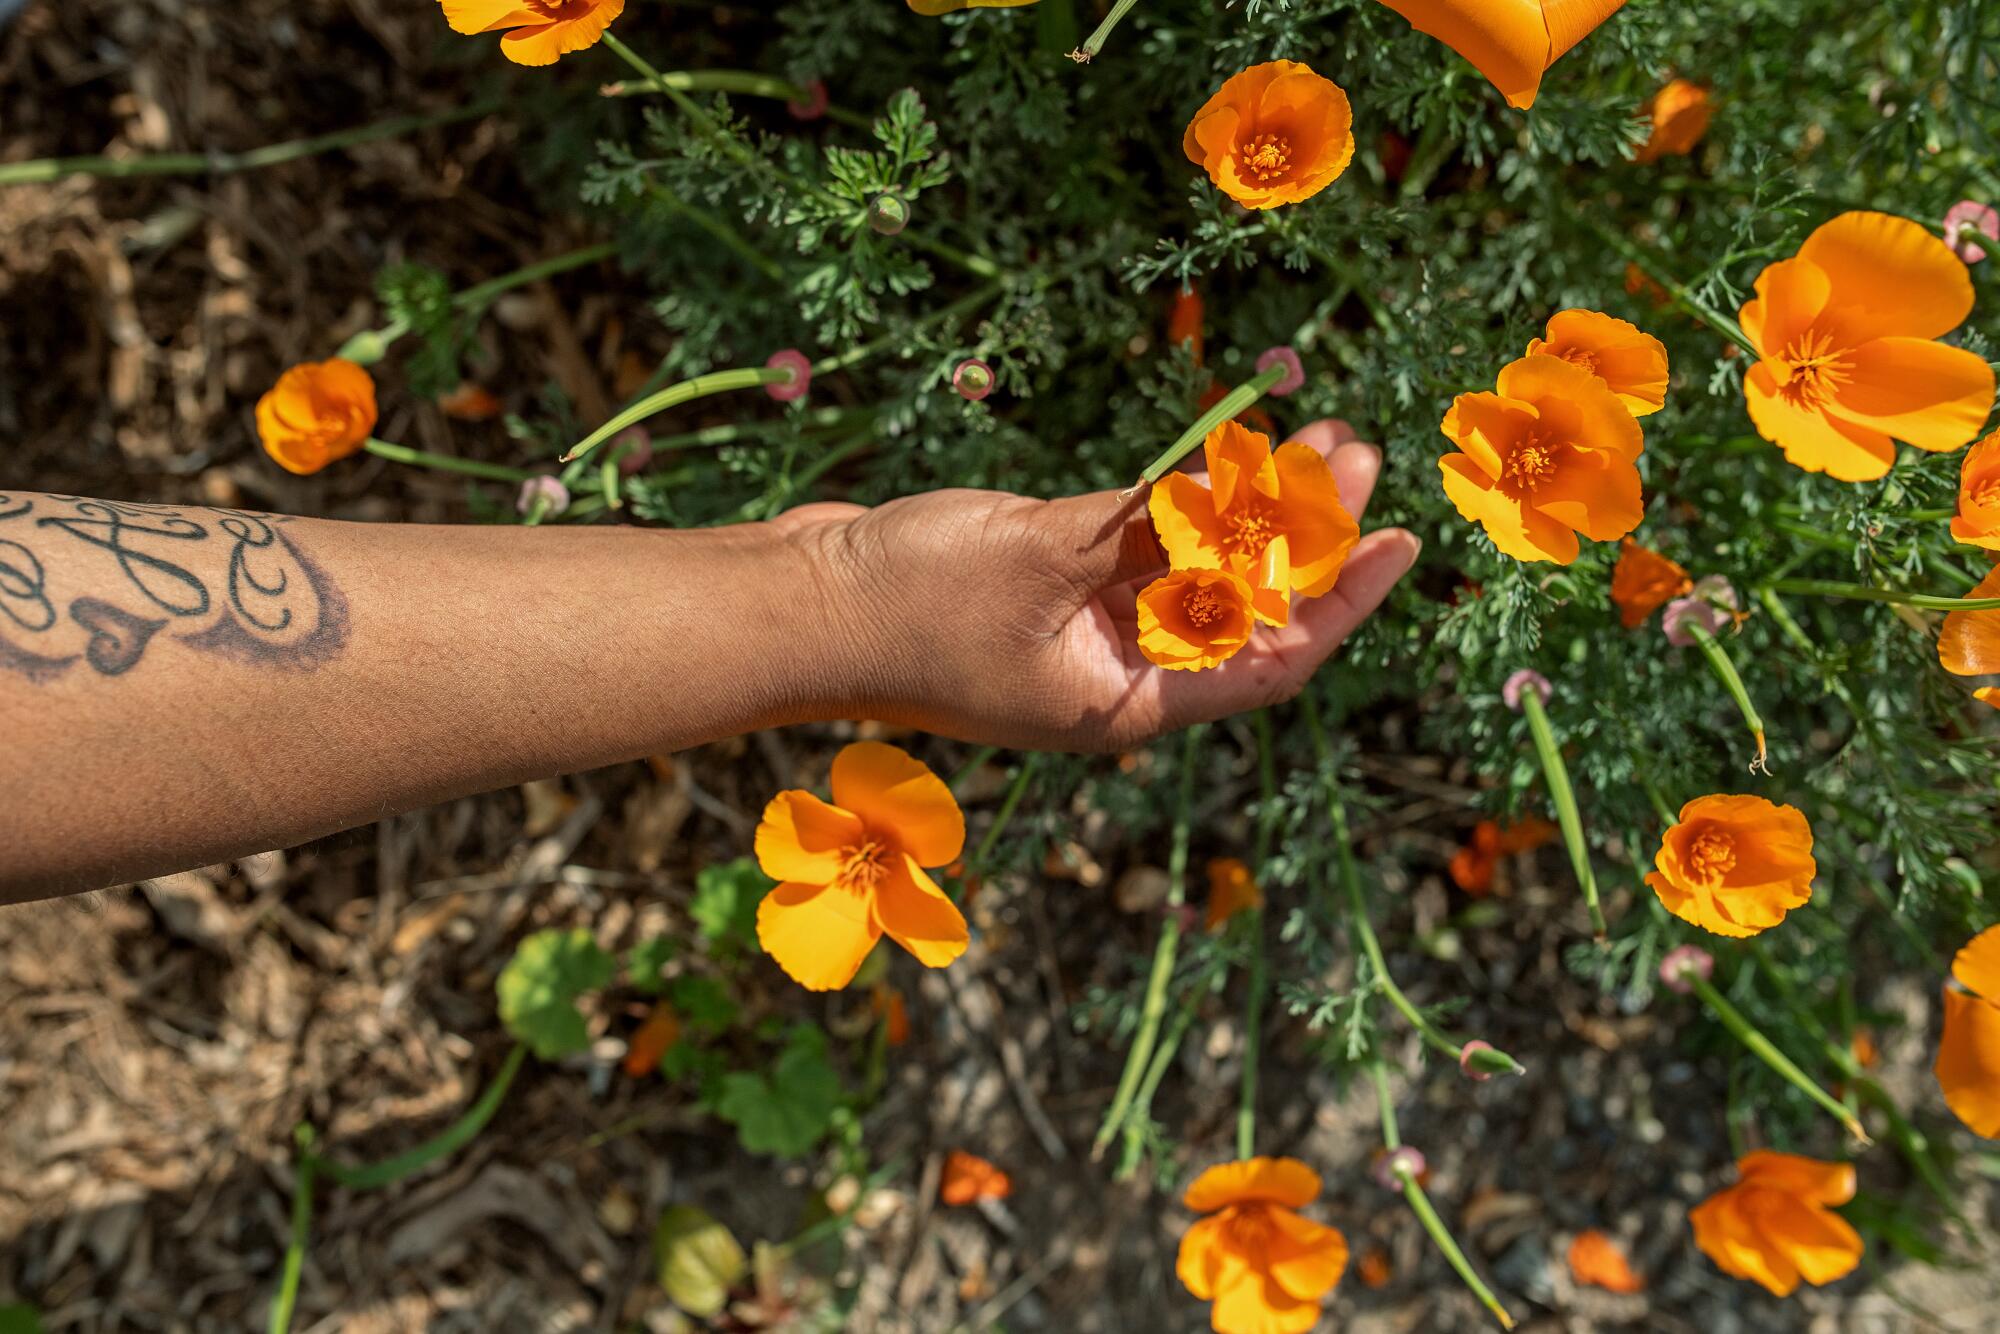 Marylin Chism's arm reaches out to grab orange flowers.